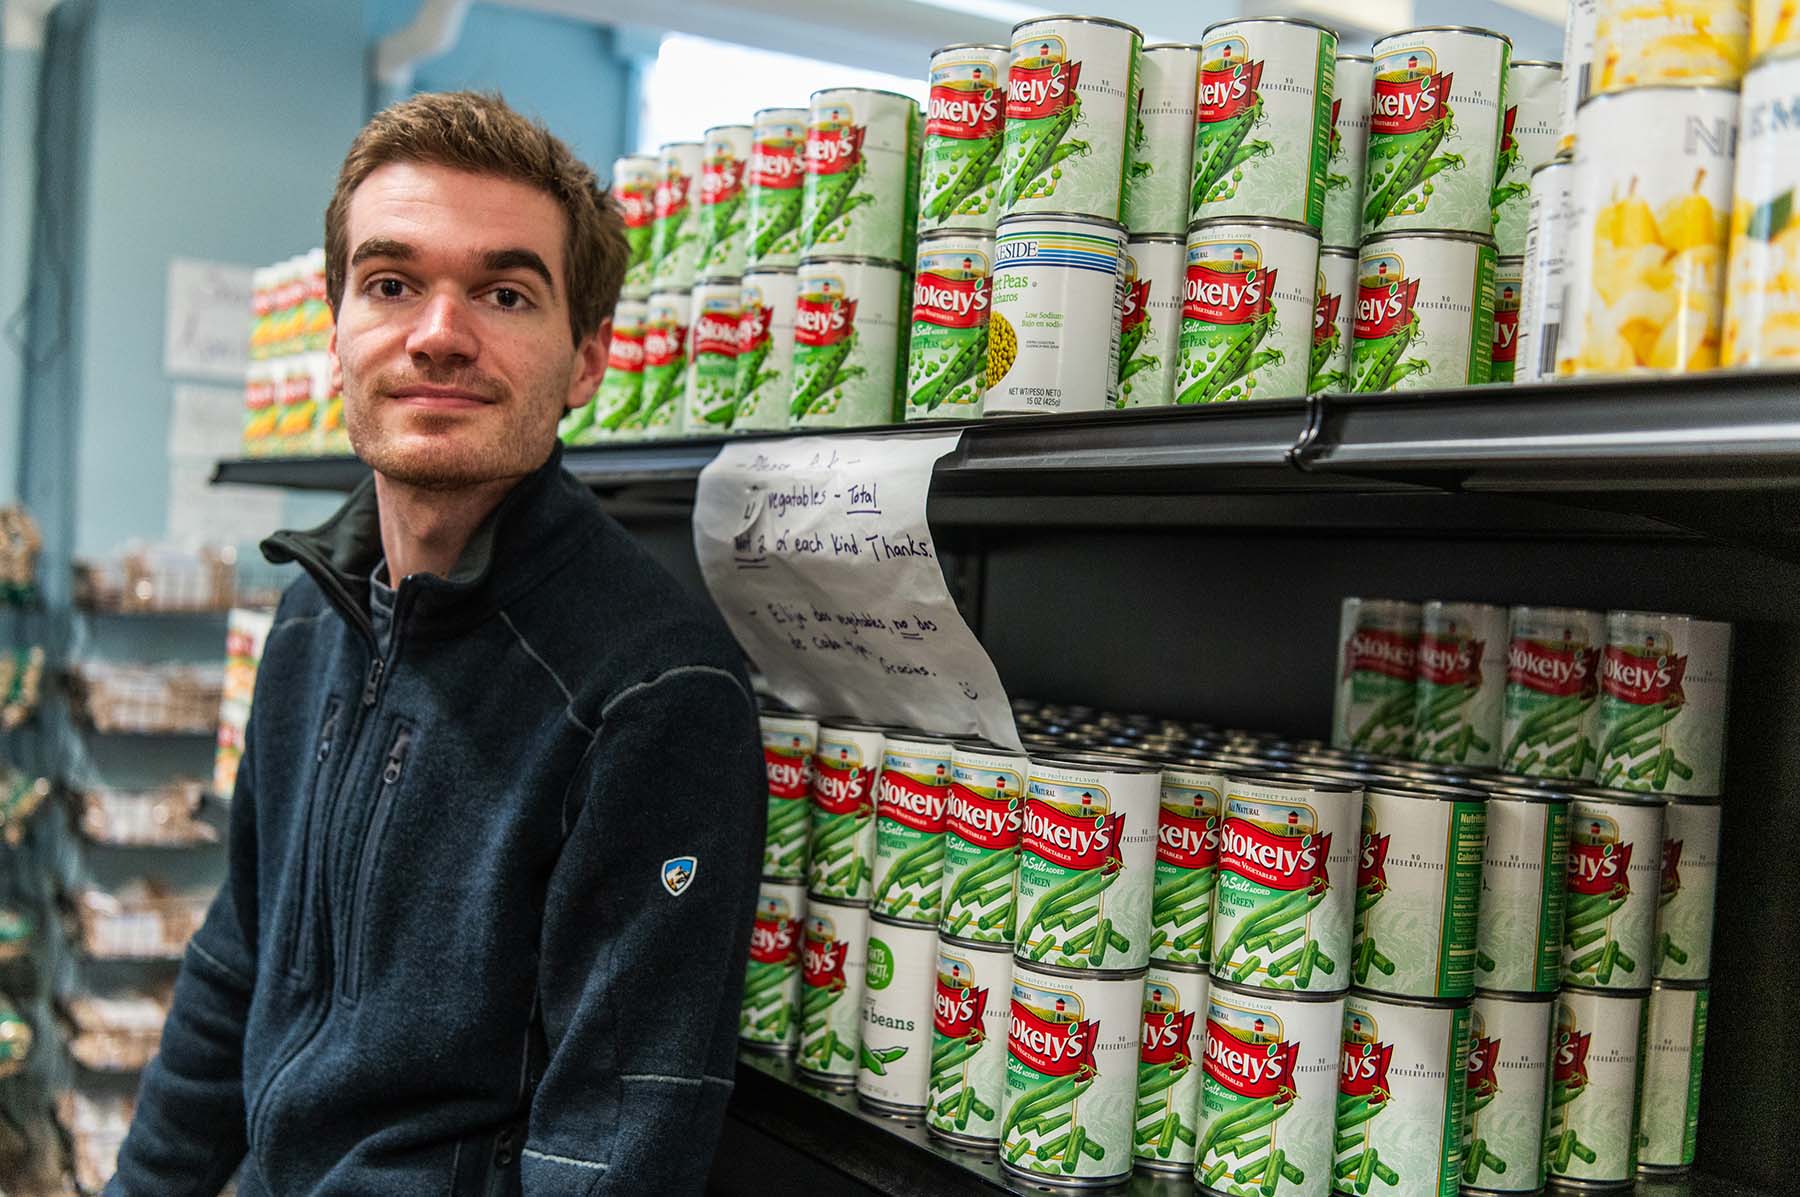 A person posing next to shelves filled with various canned food items.